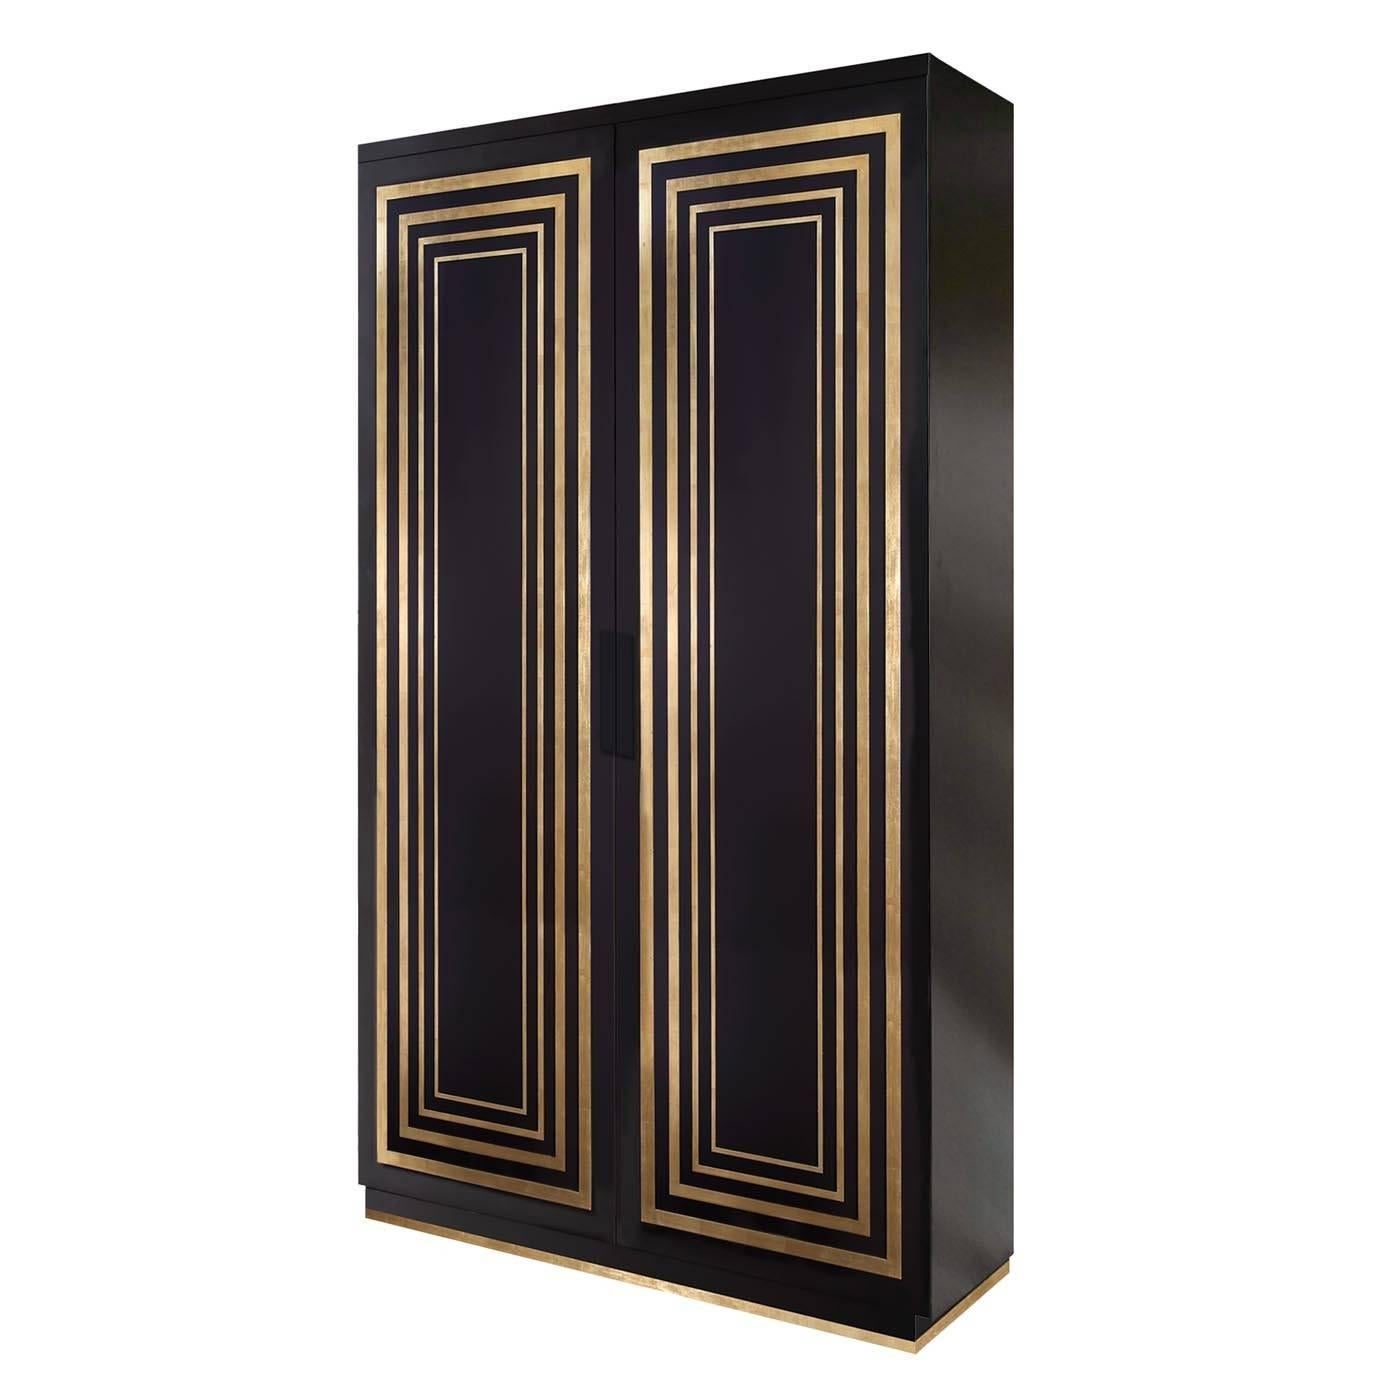 This two-door cabinet or wardrobe is the result of the finest Italian craftsmanship. Perfect for storing everything from books to dinnerware, it features four internal shelves and two doors overlaid with a hand-applied gold leaf detailing. The